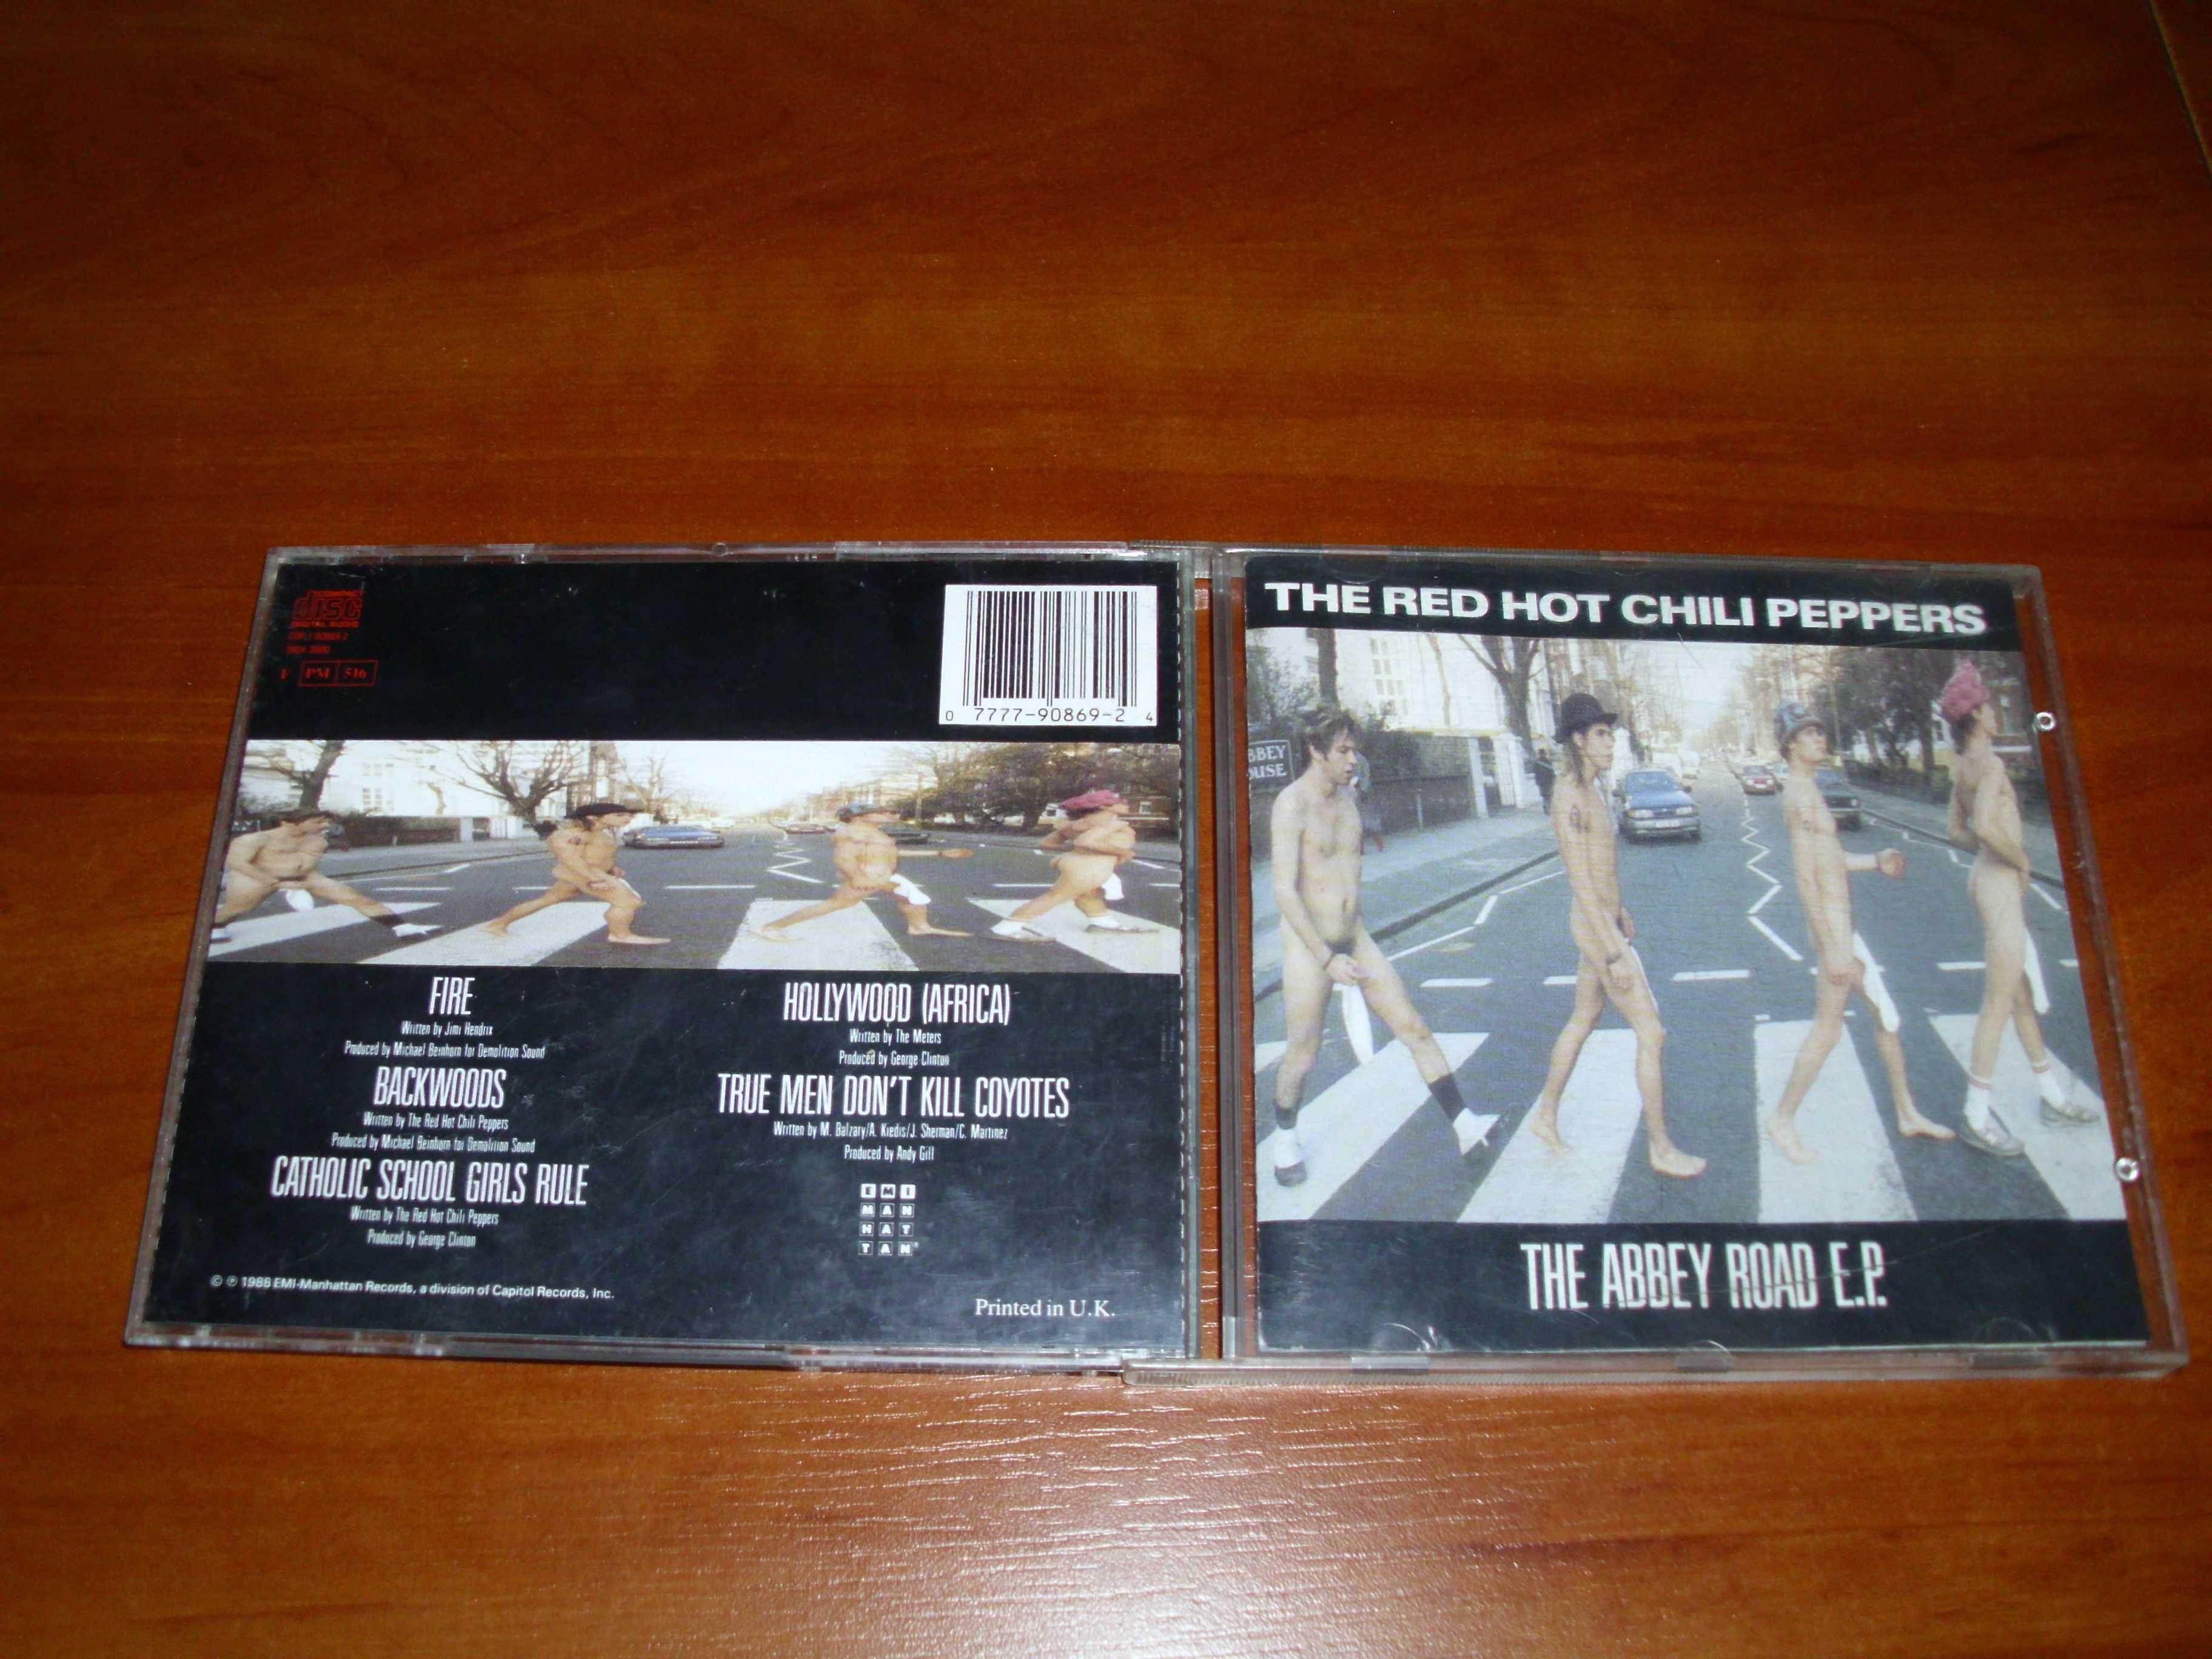 The Red Hot Chili Peppers - The Abbey Road E.P. 1988r.